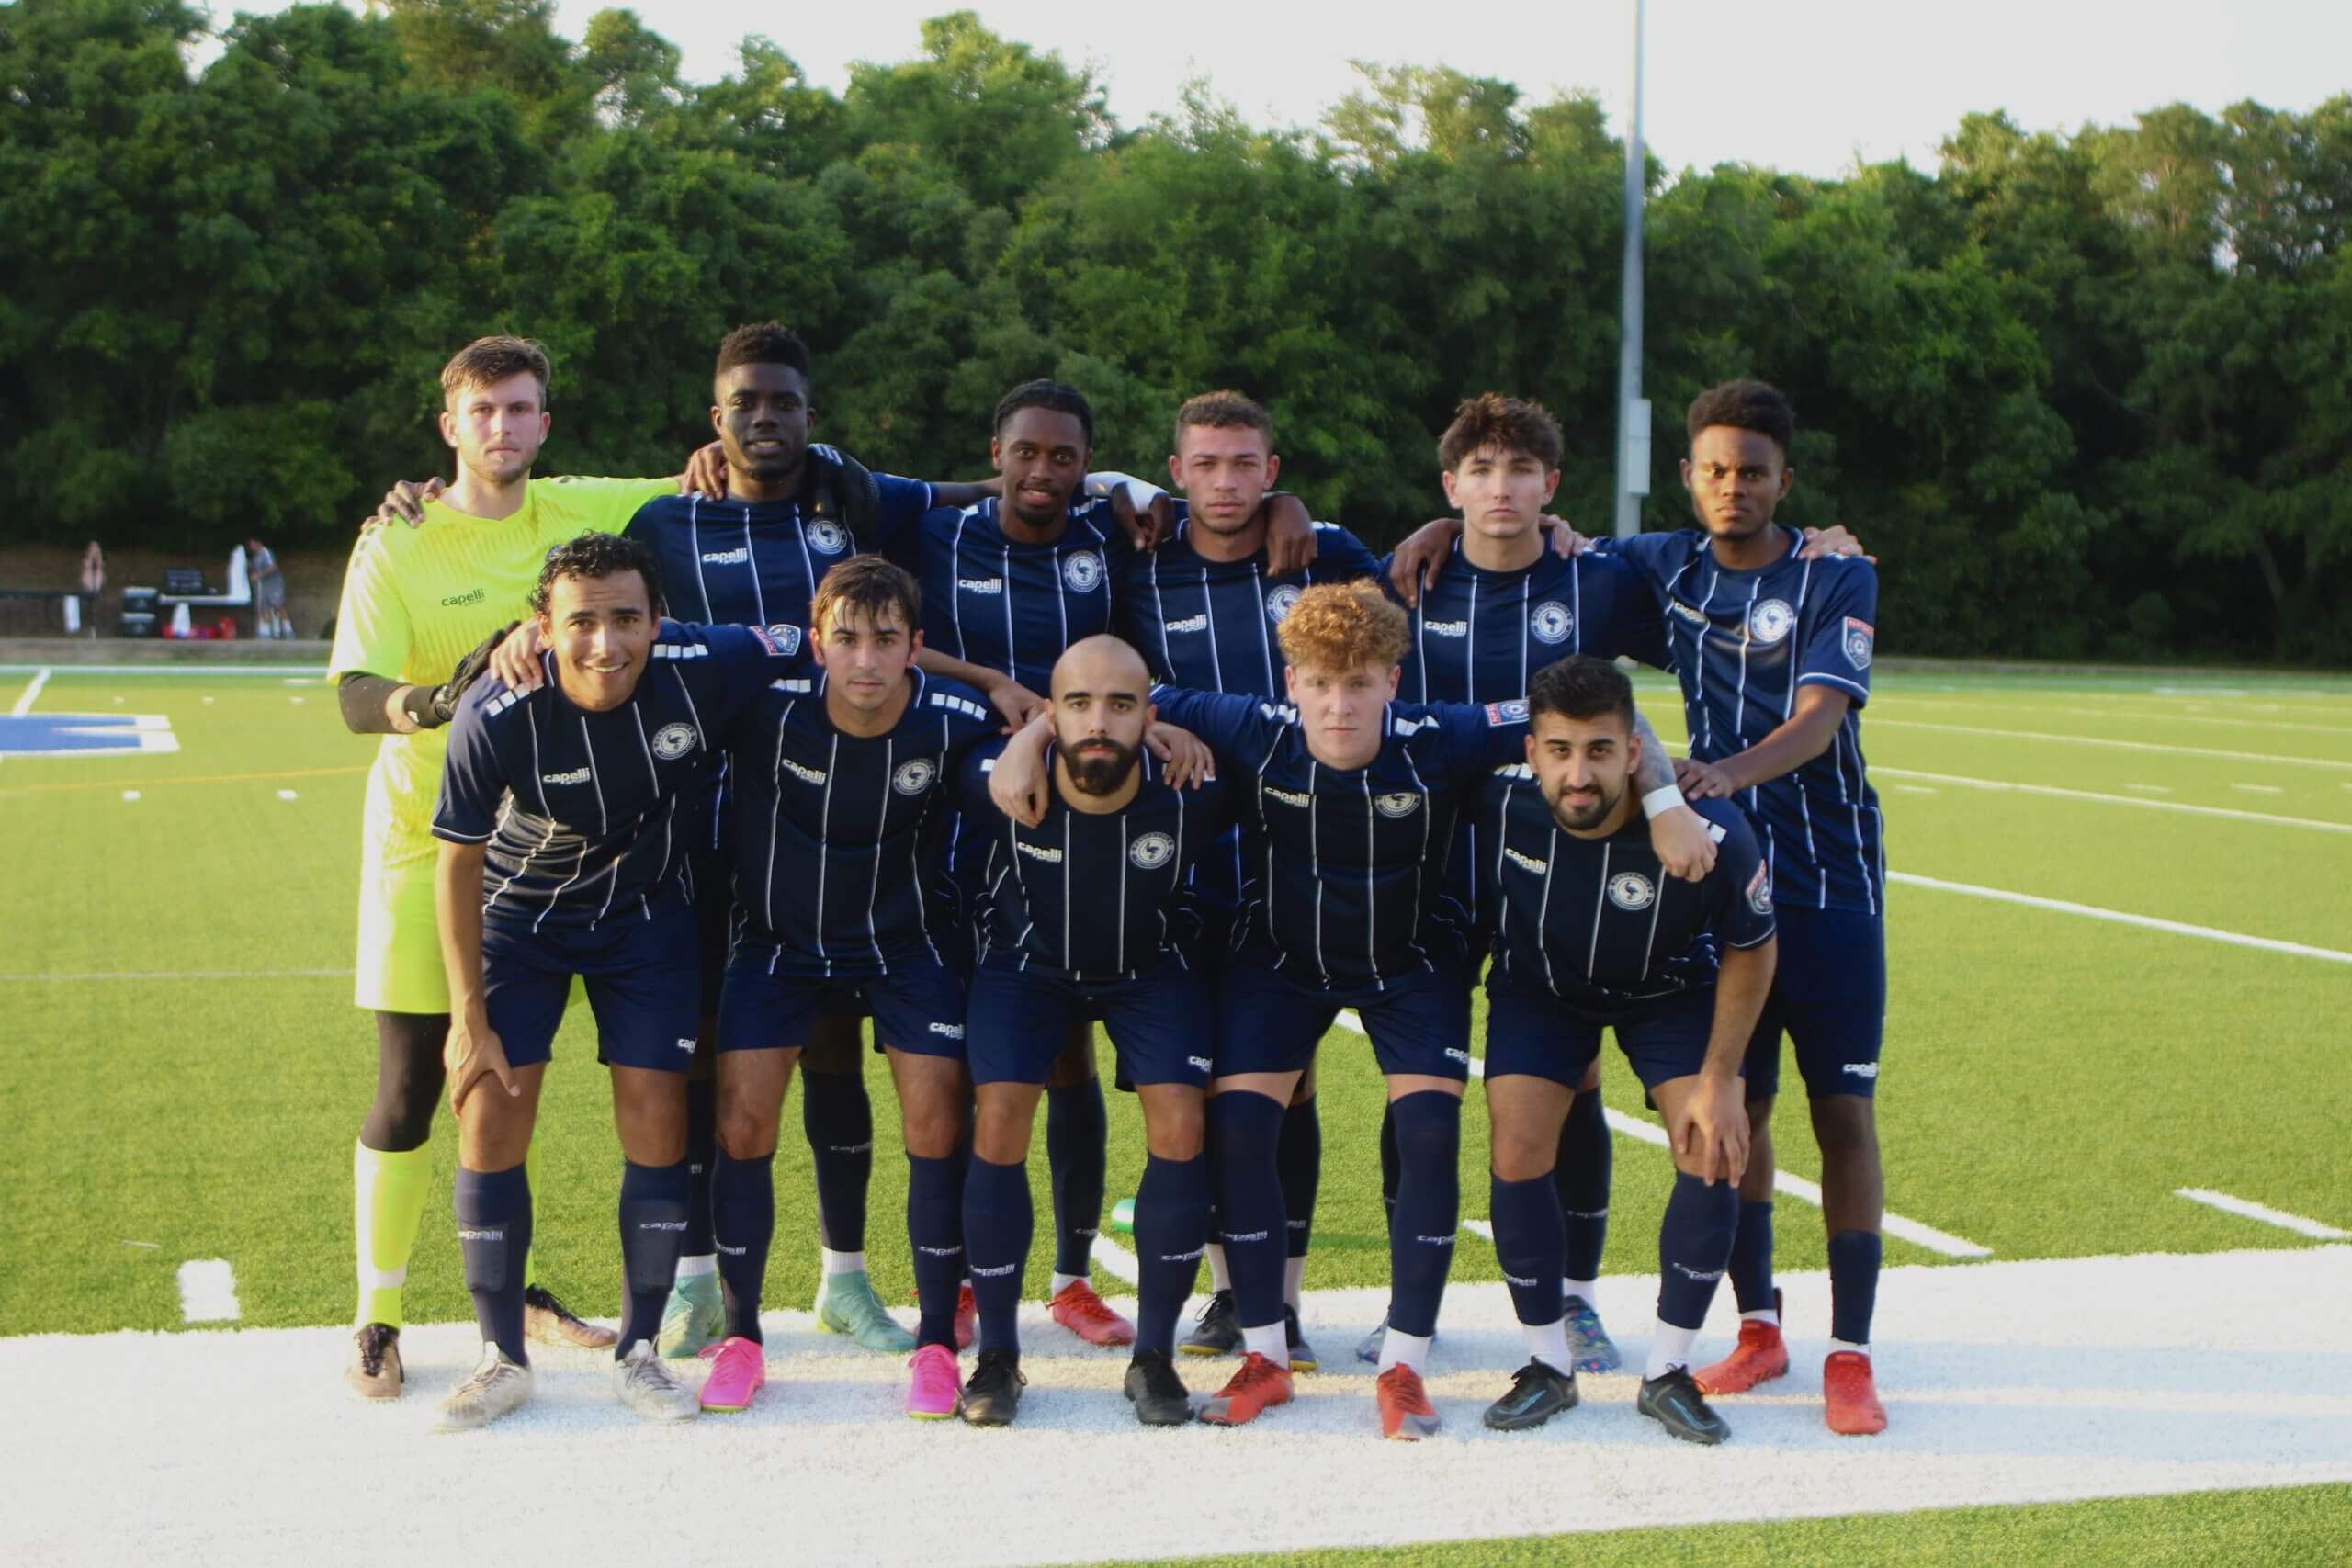 EXCITING 2-2 DRAW FOR PENSACOLA FC AND TALLAHASSEE SC